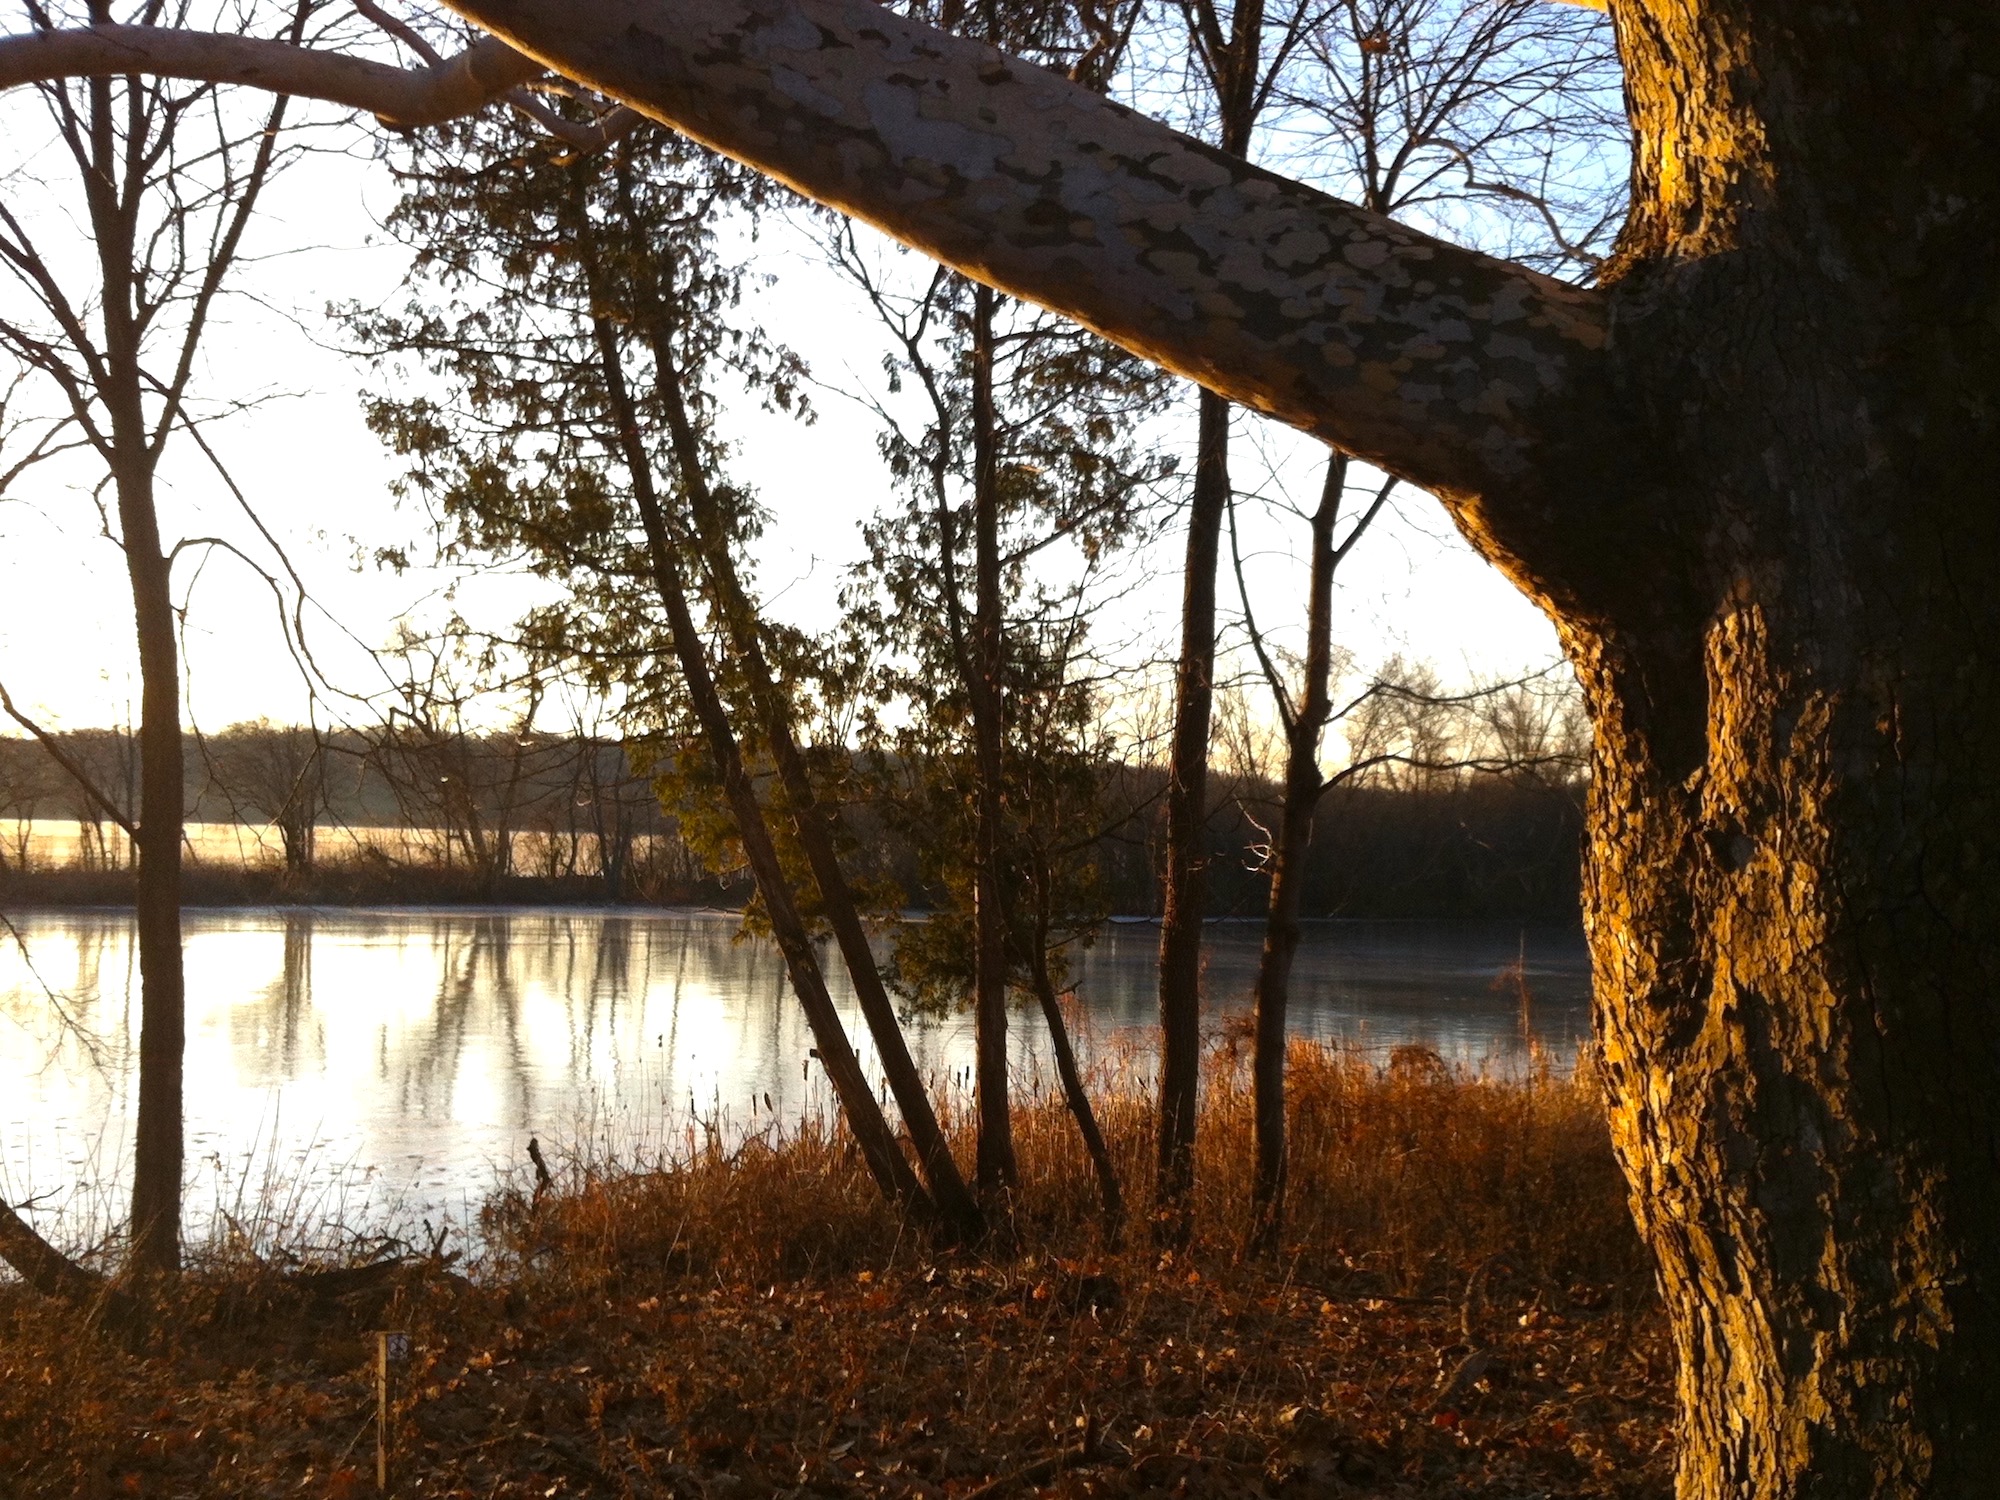 Sycamore tree between Ho-Nee-Um Pond and Arbor Drive on north shore of Lake Wingra on January 2, 2015.